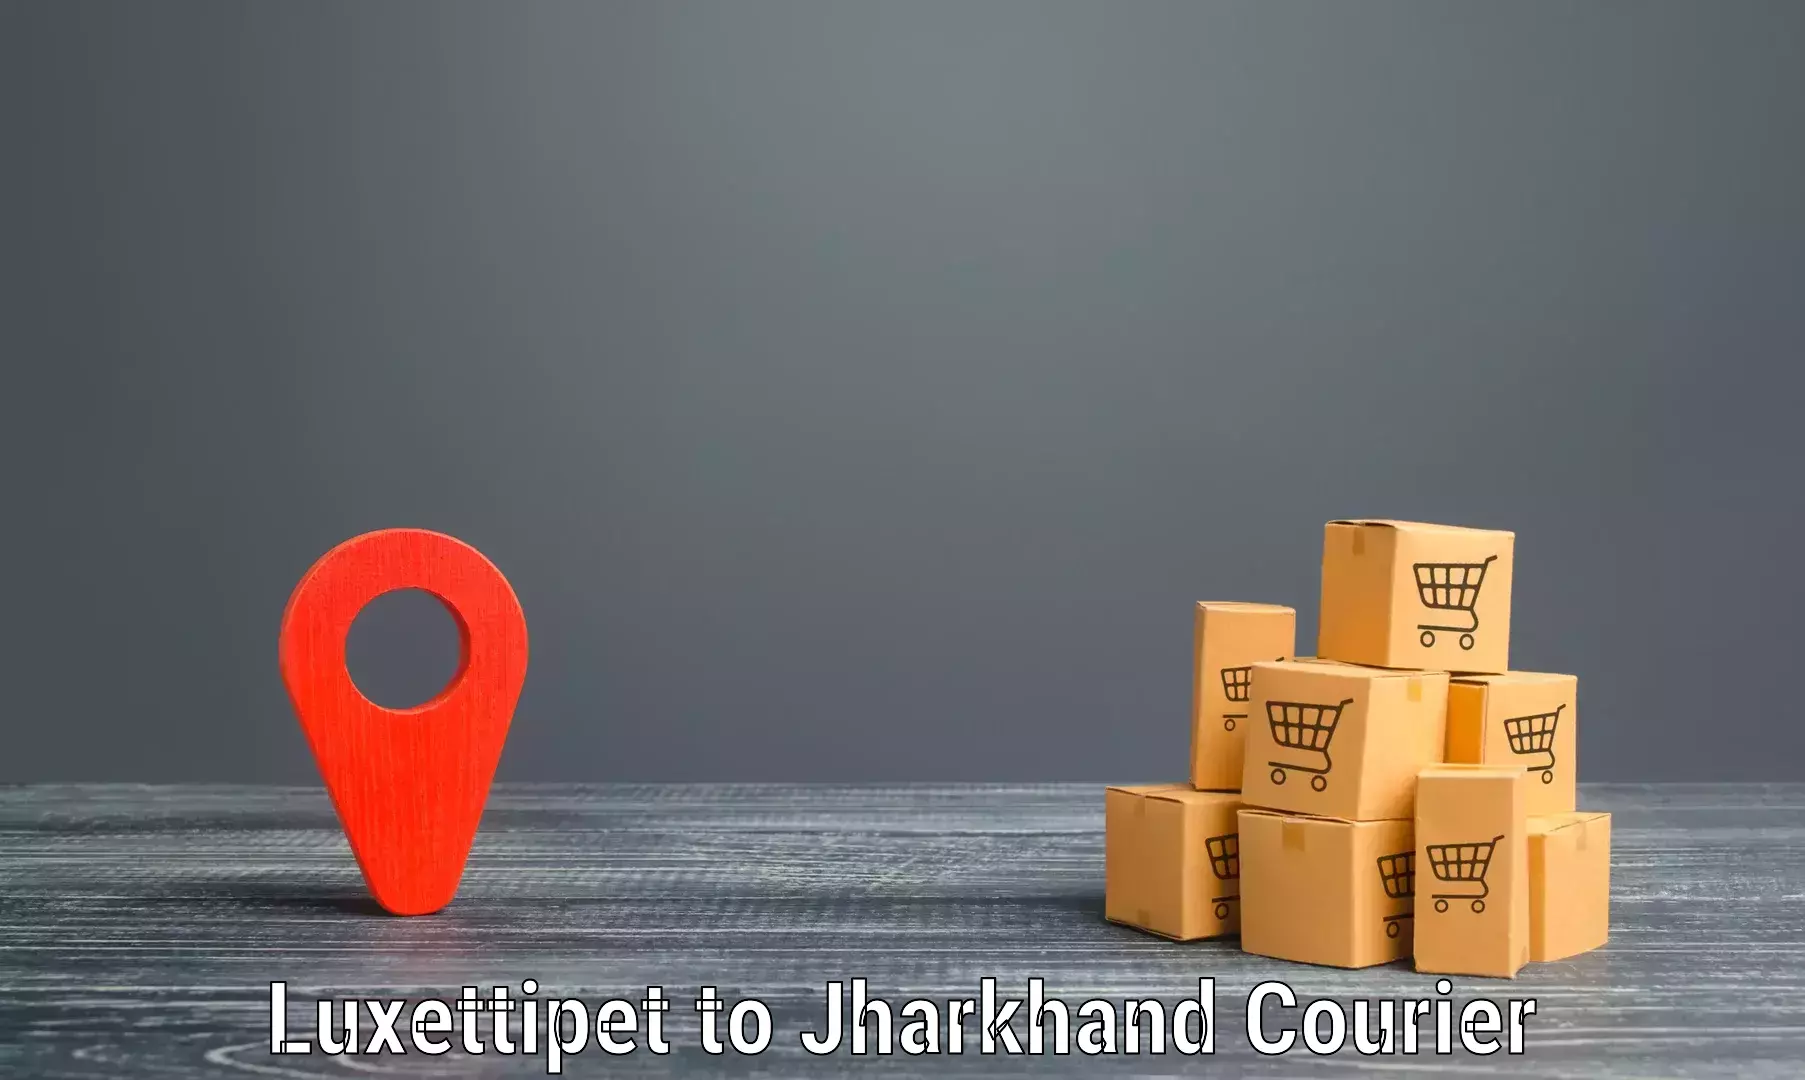 Easy access courier services Luxettipet to Rangalia